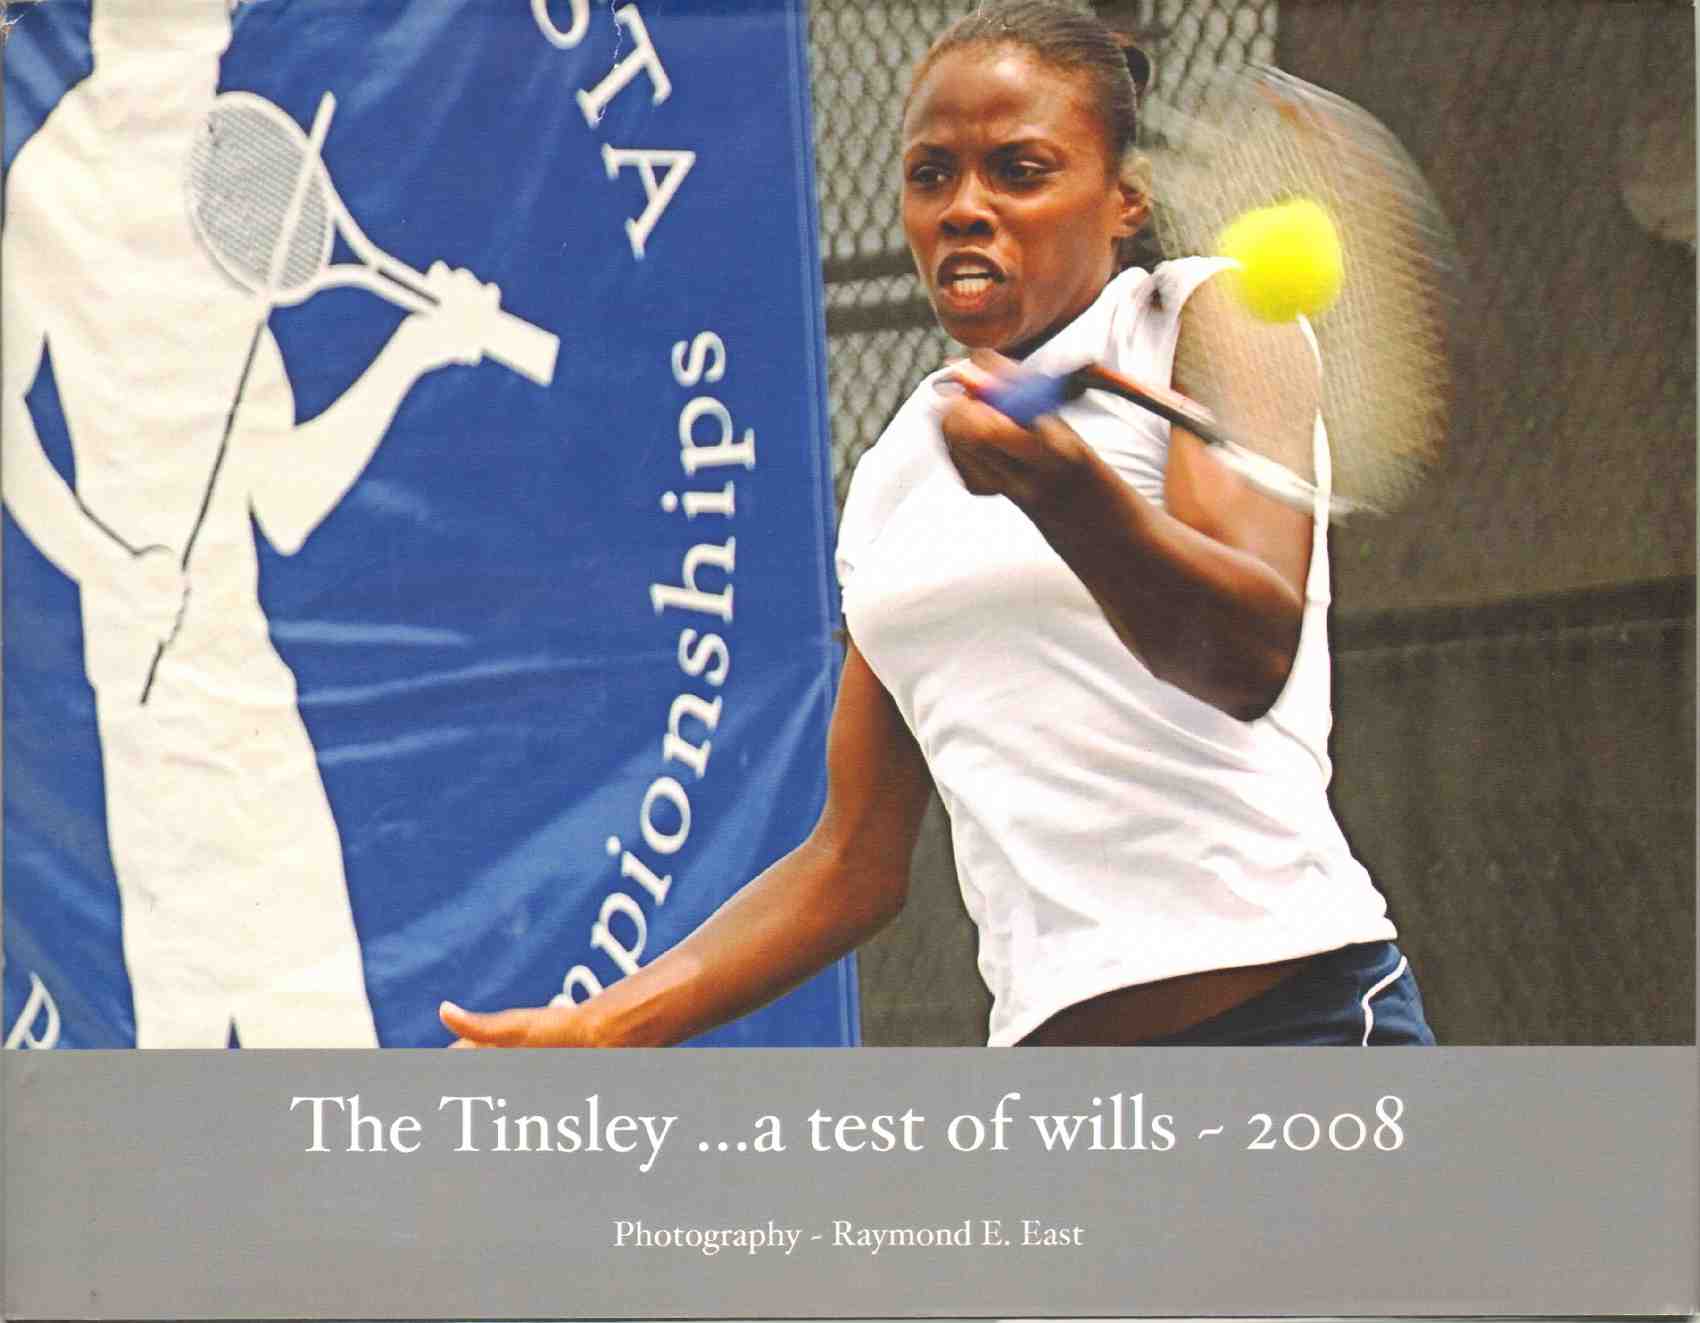 East, Raymond E. - THE TINSLEY ...a test of wills ~ 2008